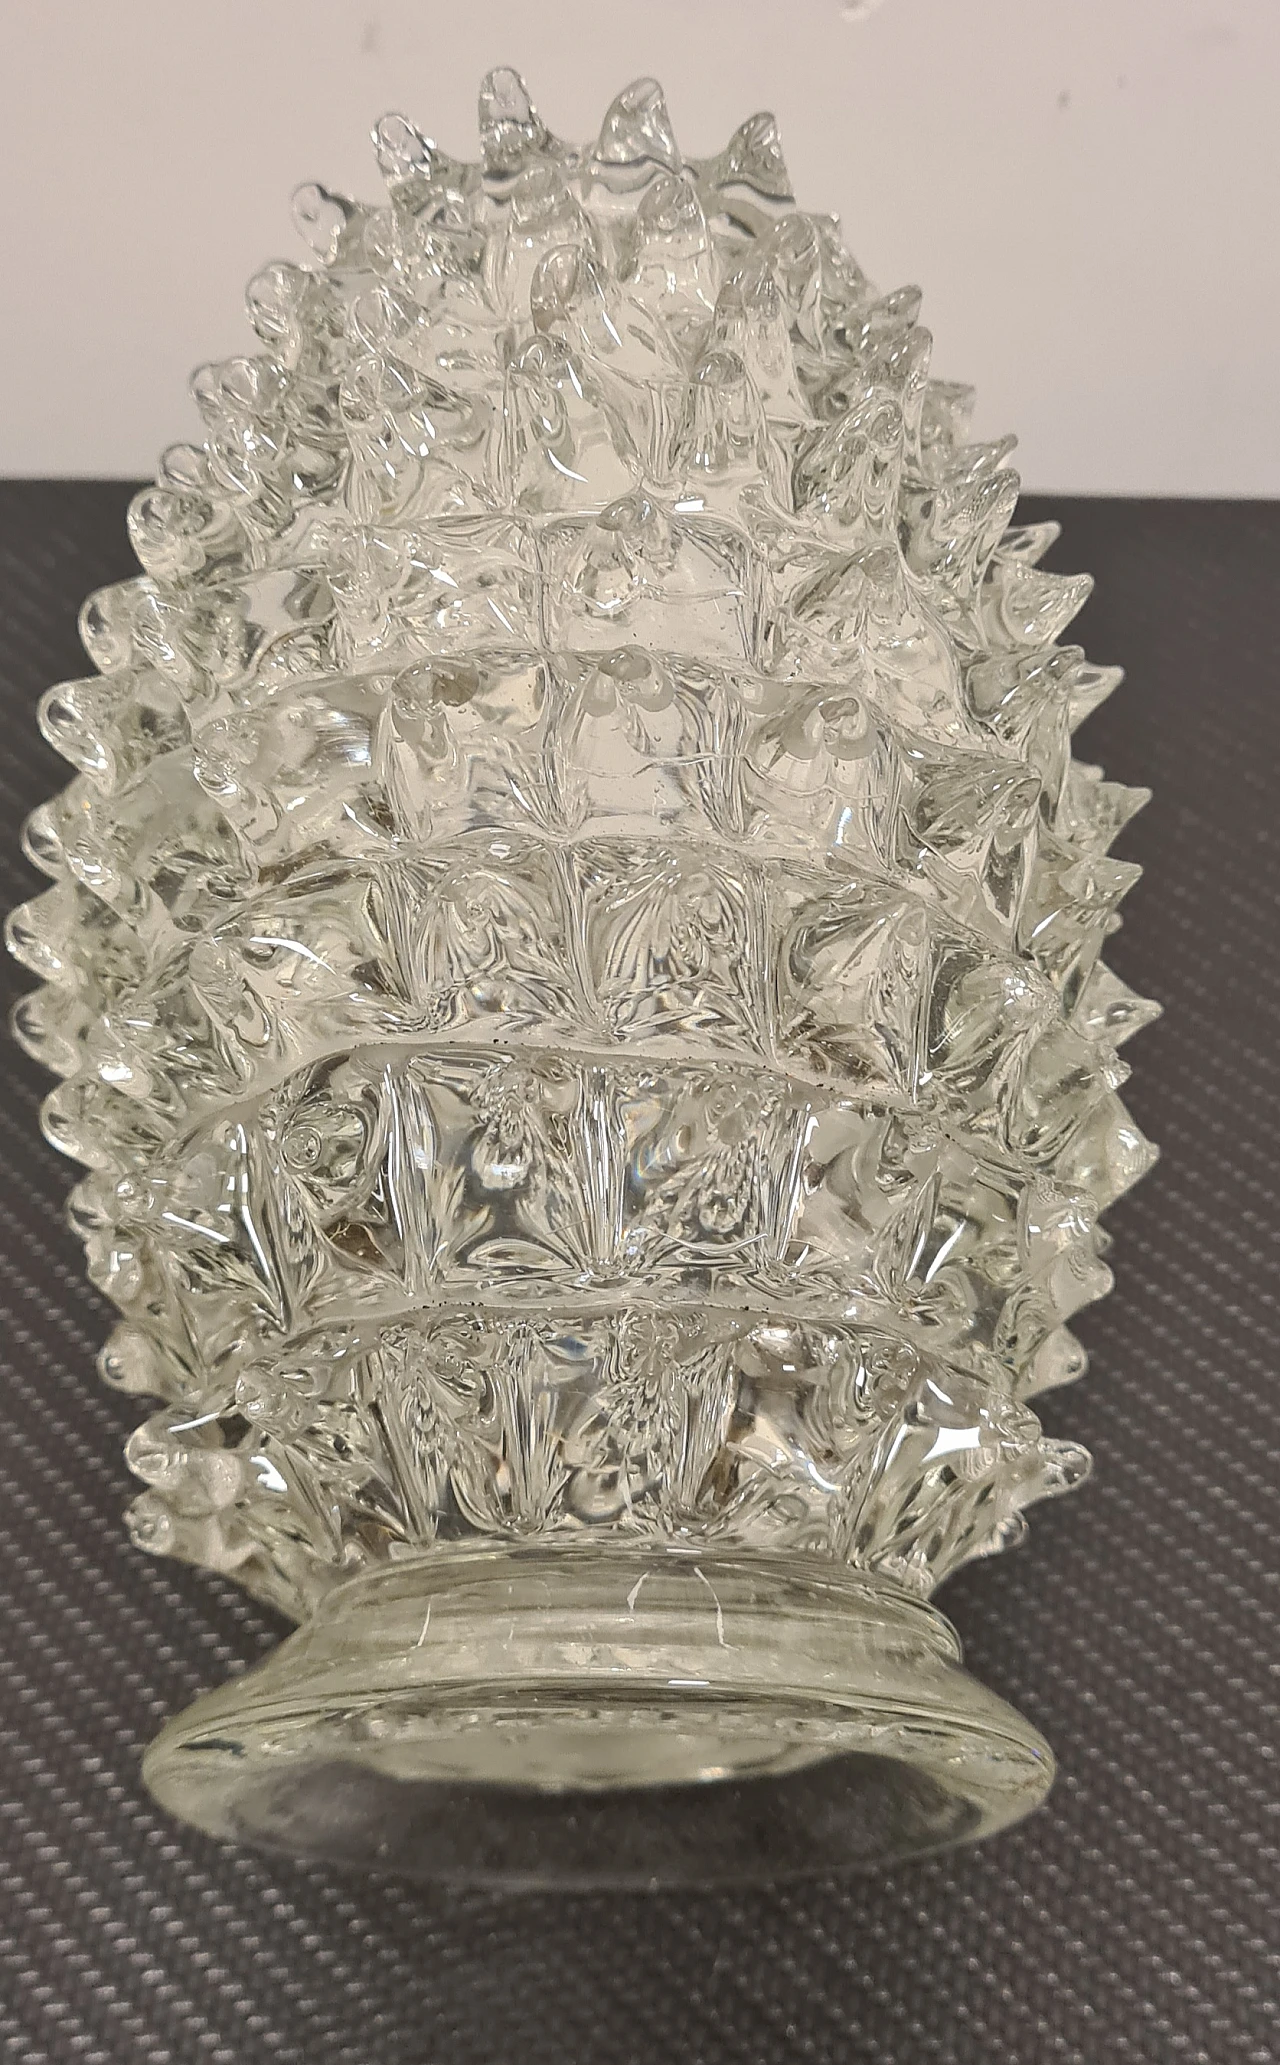 Rostered Murano glass vase by Barovier and Toso, 1940s 17